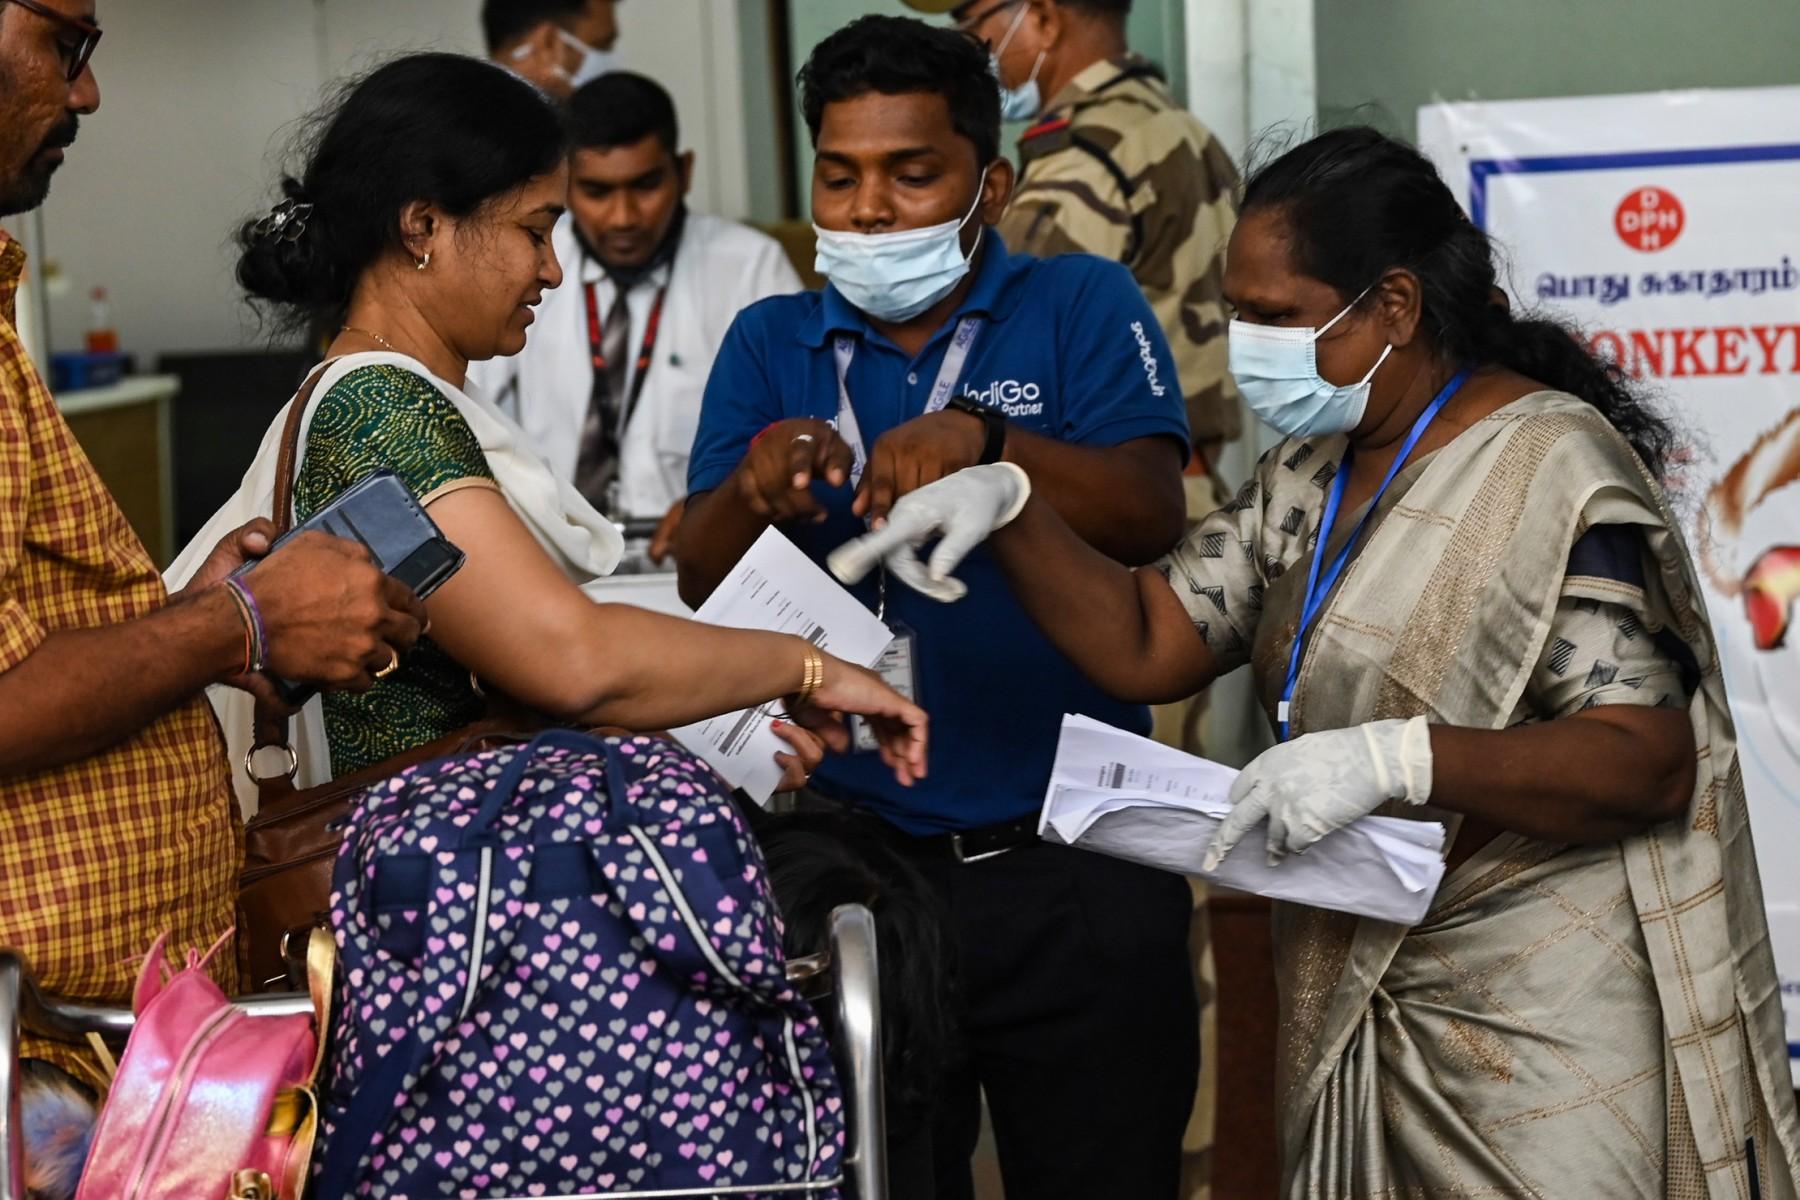 Health workers screen passengers arriving from abroad for monkeypox symptoms at the Anna International Airport terminal in Chennai on June 3. Photo: AFP